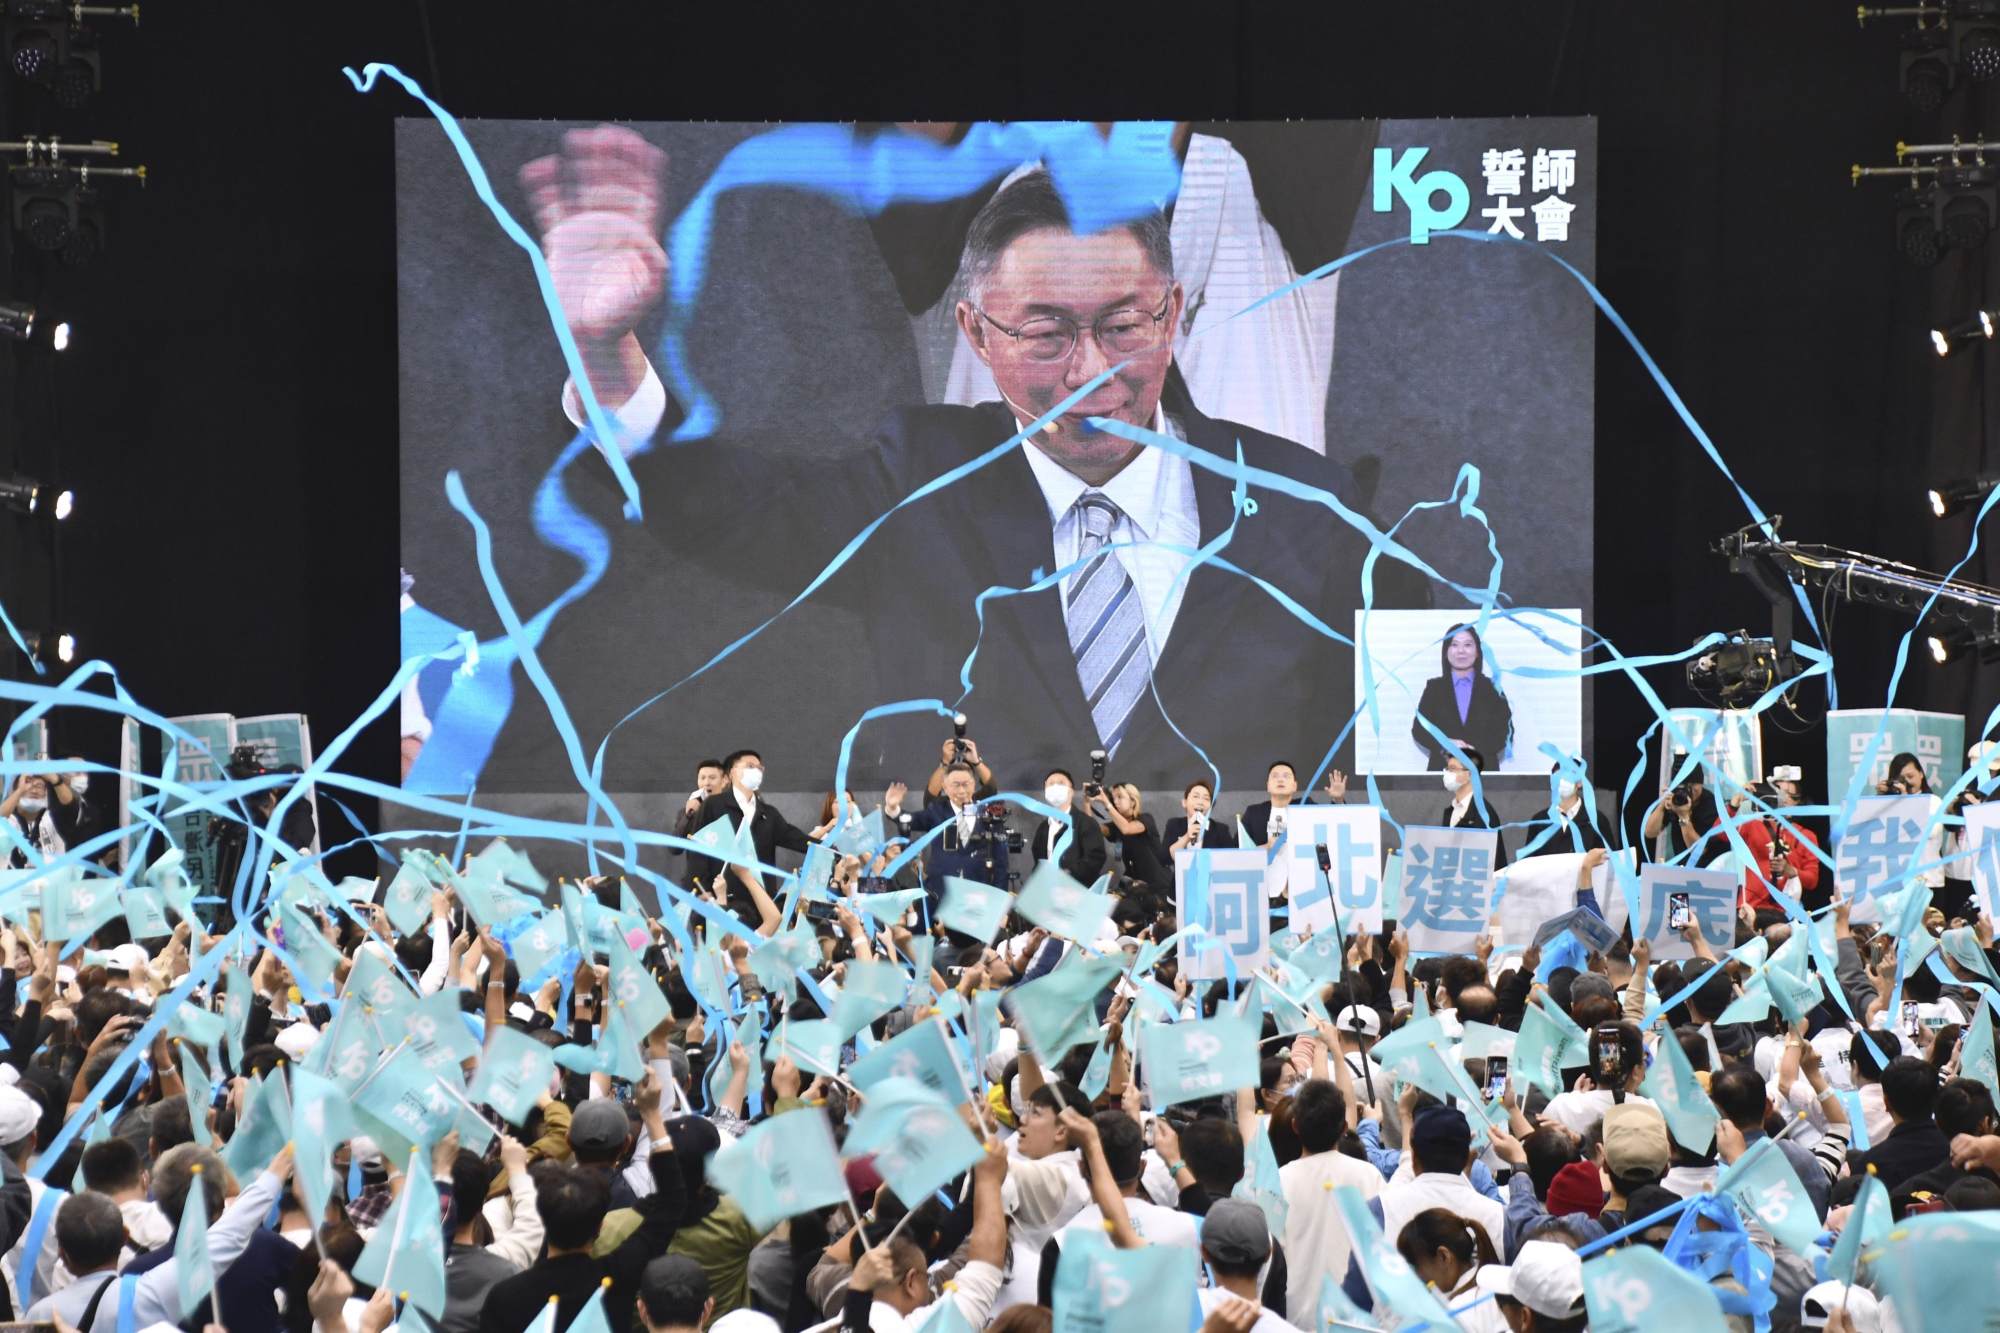 Presidential candidate Ko Wen-je of the Taiwan People’s Party at a rally near Taipei on Sunday. Photo: Kyodo